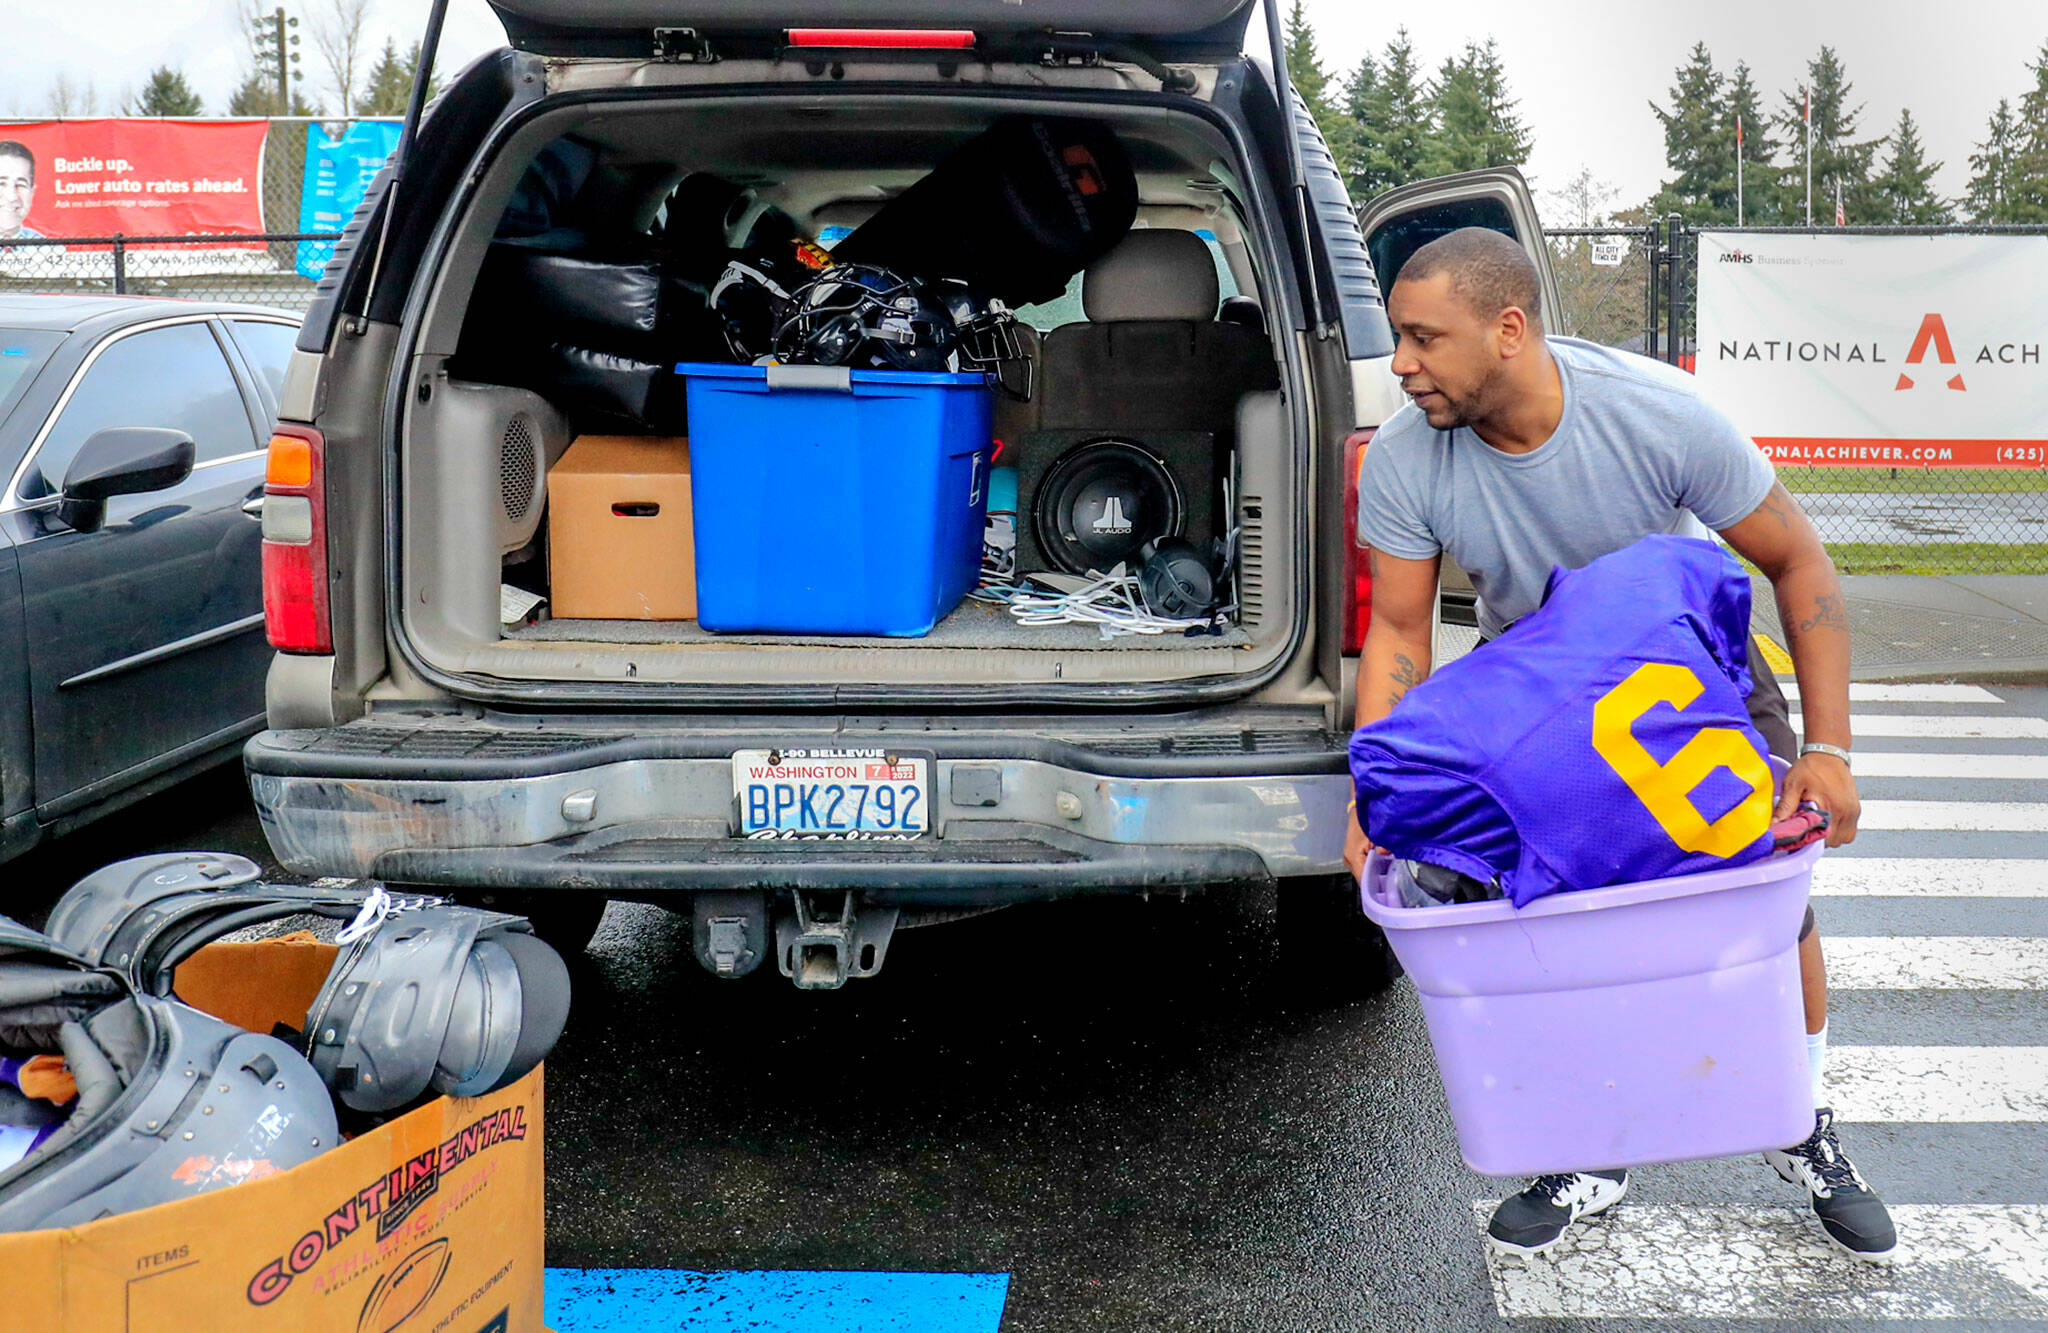 Mike Thomas packs away pads and helmets after practice at Archbishop Murphy High School in Everett. (Kevin Clark / The Herald)